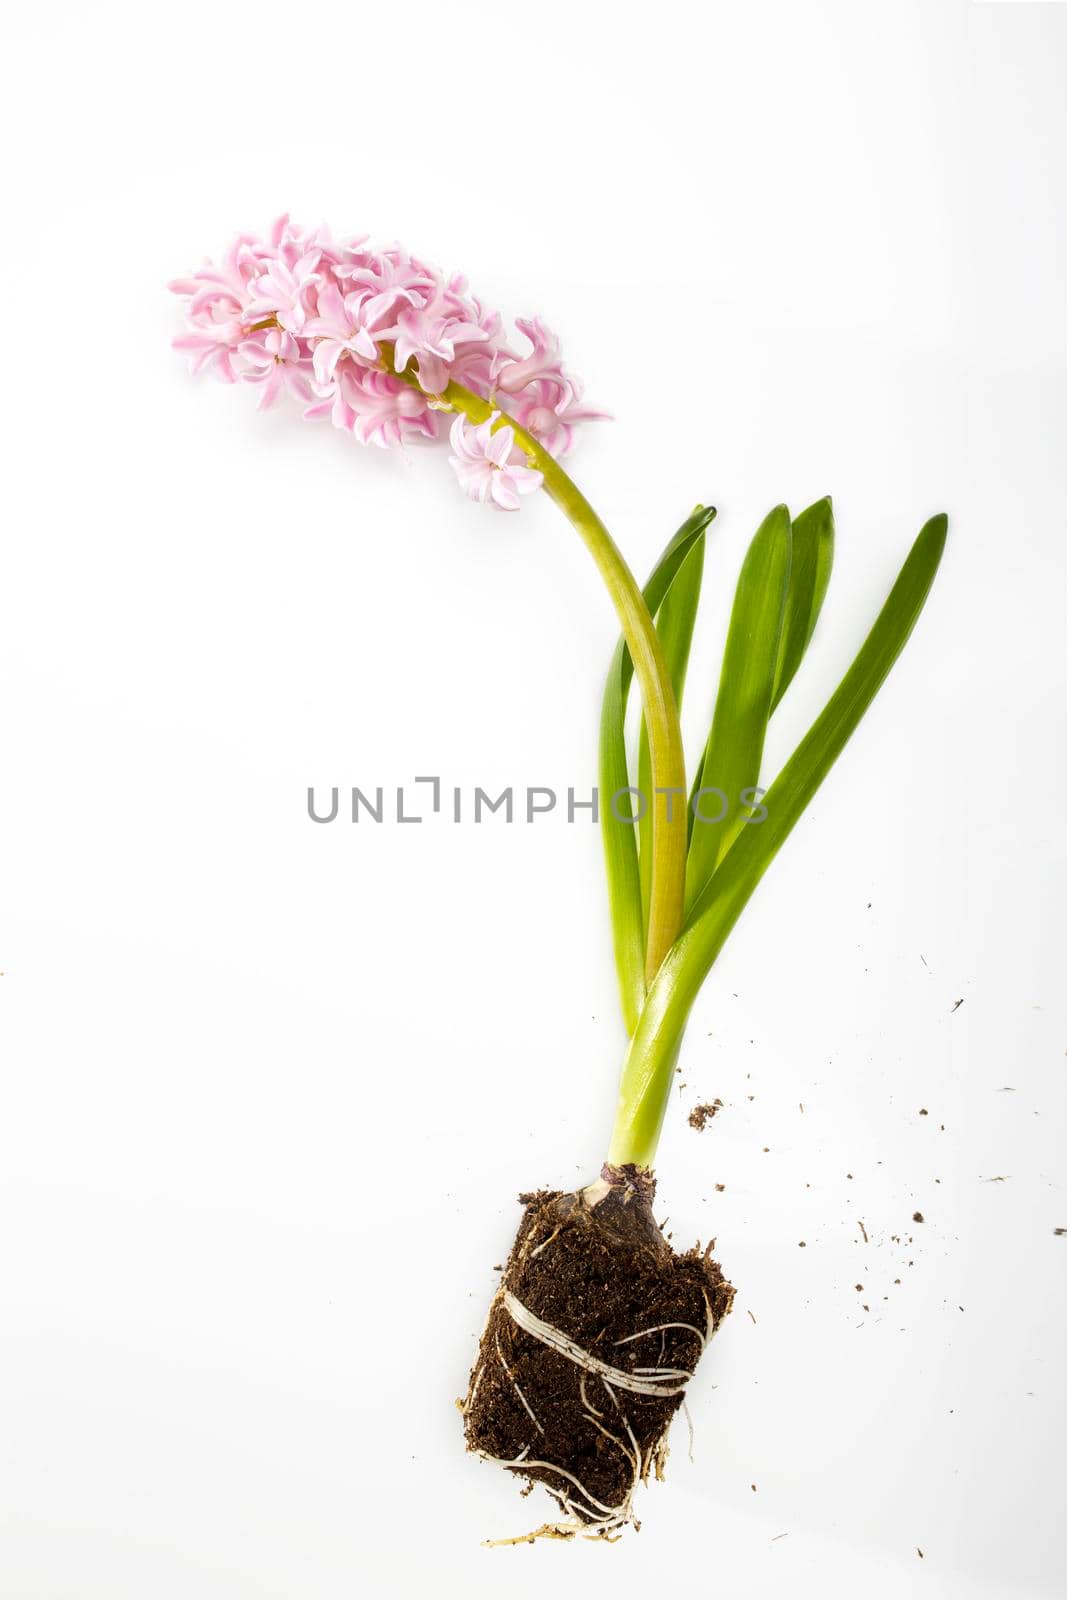 hyacinth plant bulbs and roots on a white background by elenarostunova